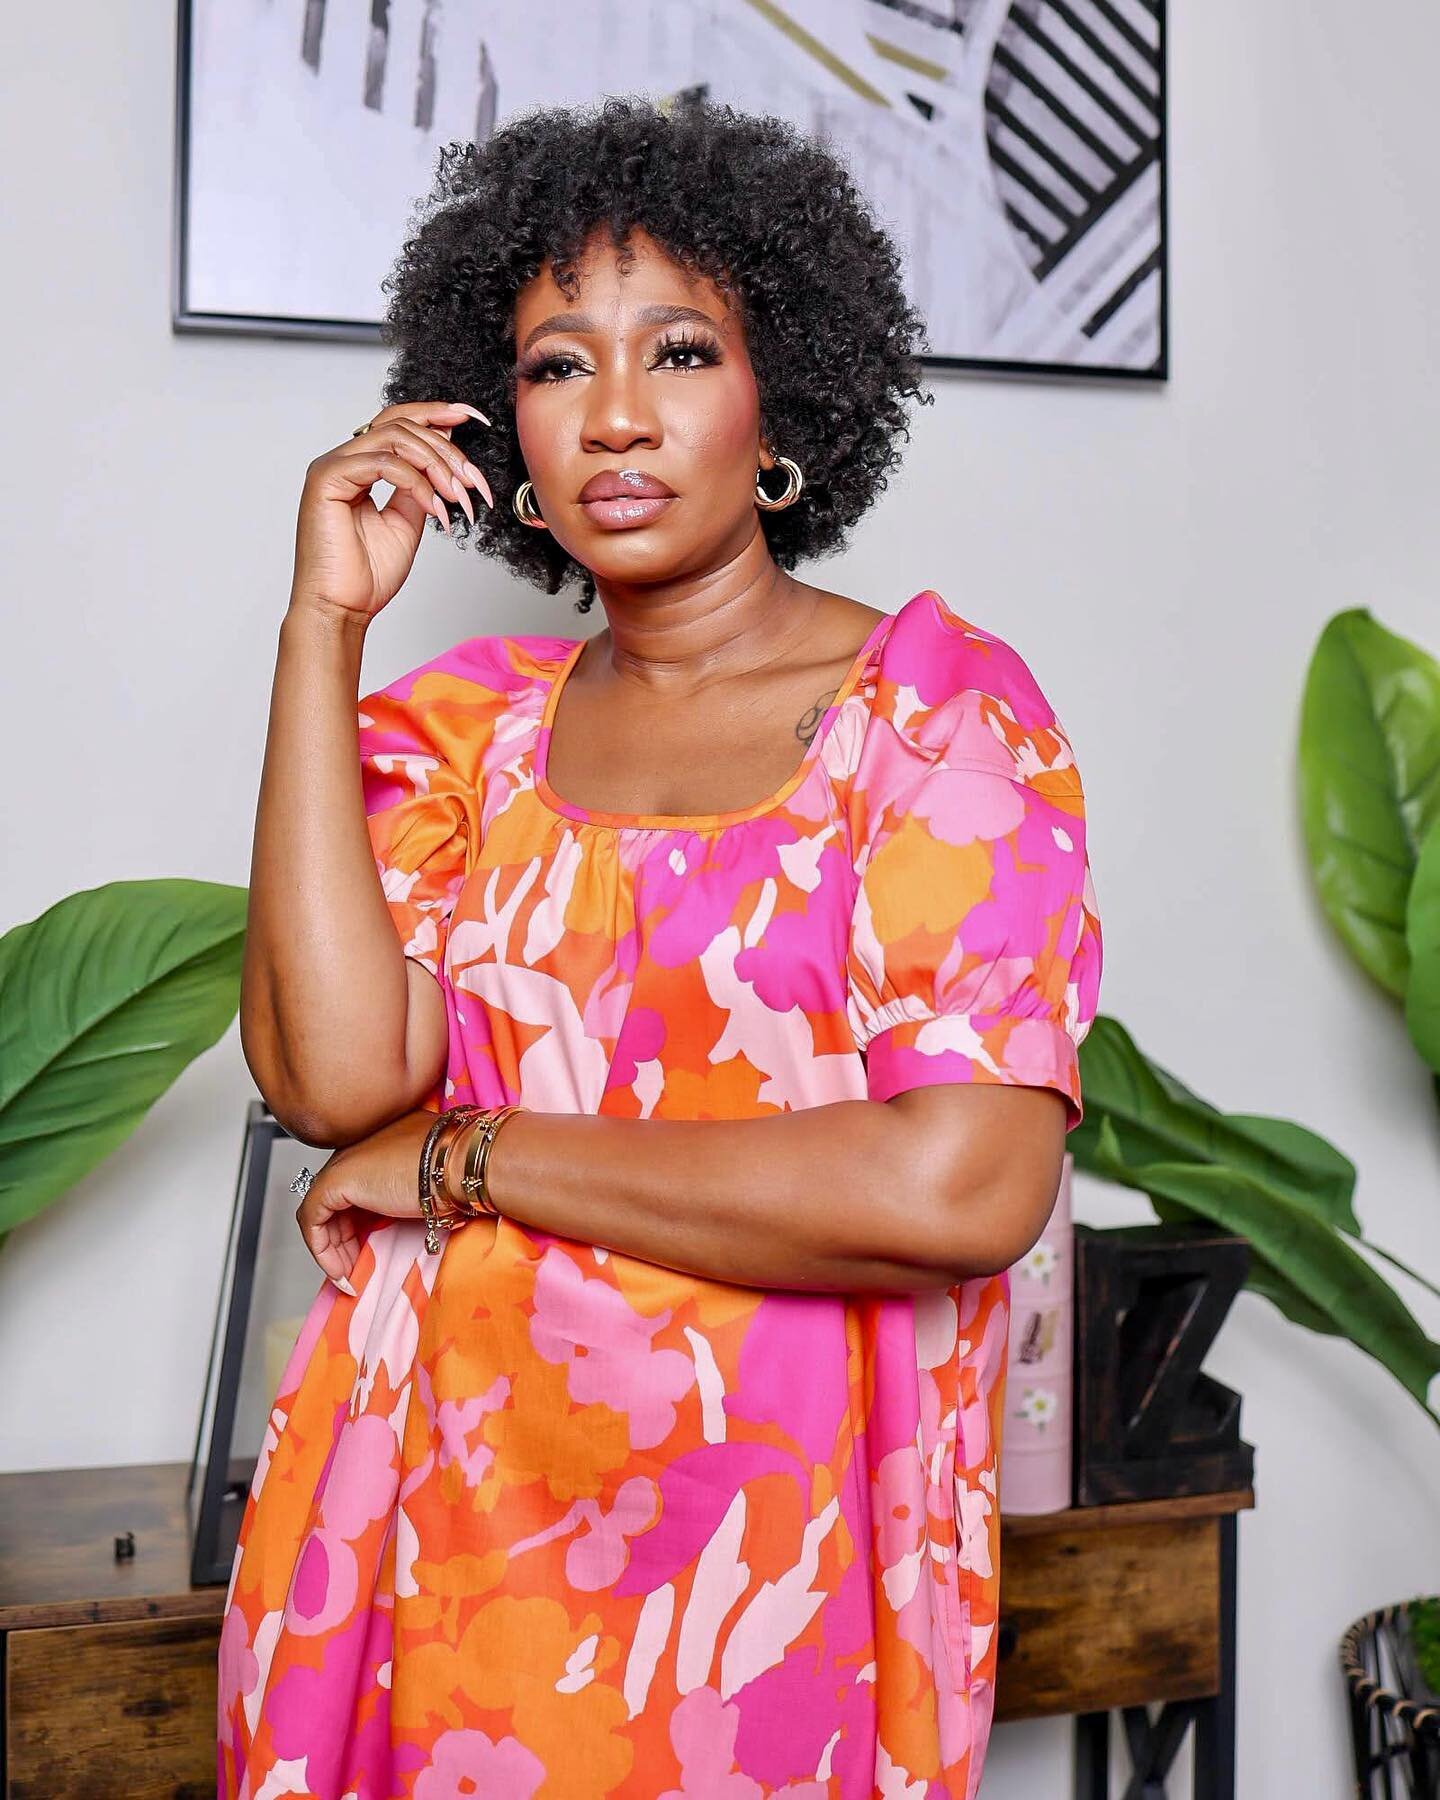 Get into this hair&hellip; I&rsquo;m obsessed with how good this twist out came out using products I picked up from @walmart earlier this week. #walmartpartner #walmartbeauty 

I&rsquo;m always in the beauty section at Walmart. They have a wide varie